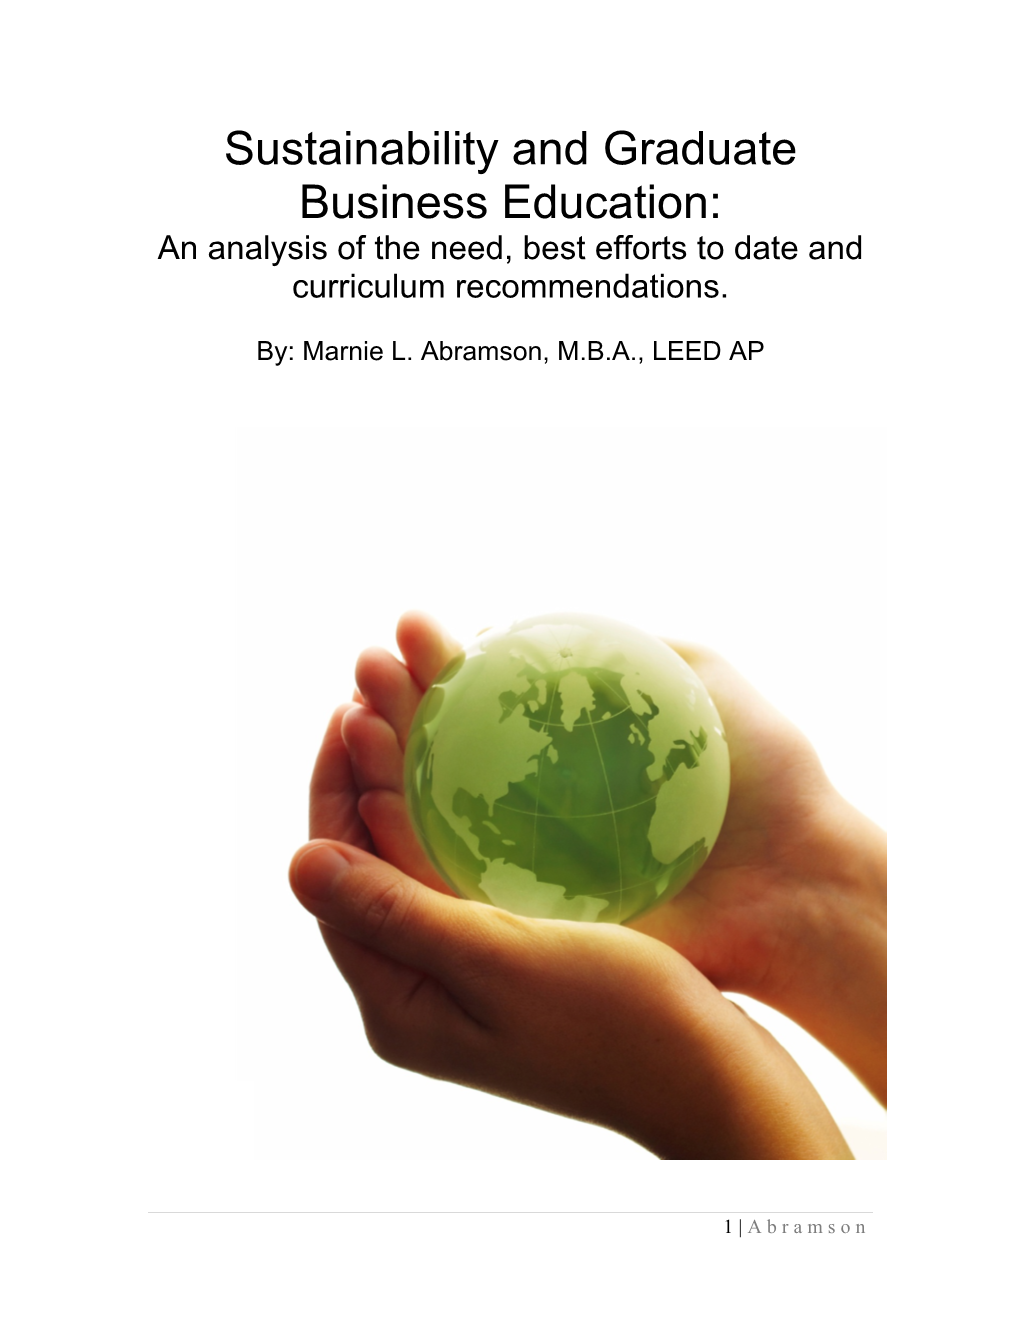 Sustainability and Graduate Business Education: an Analysis of the Need, Best Efforts to Date and Curriculum Recommendations